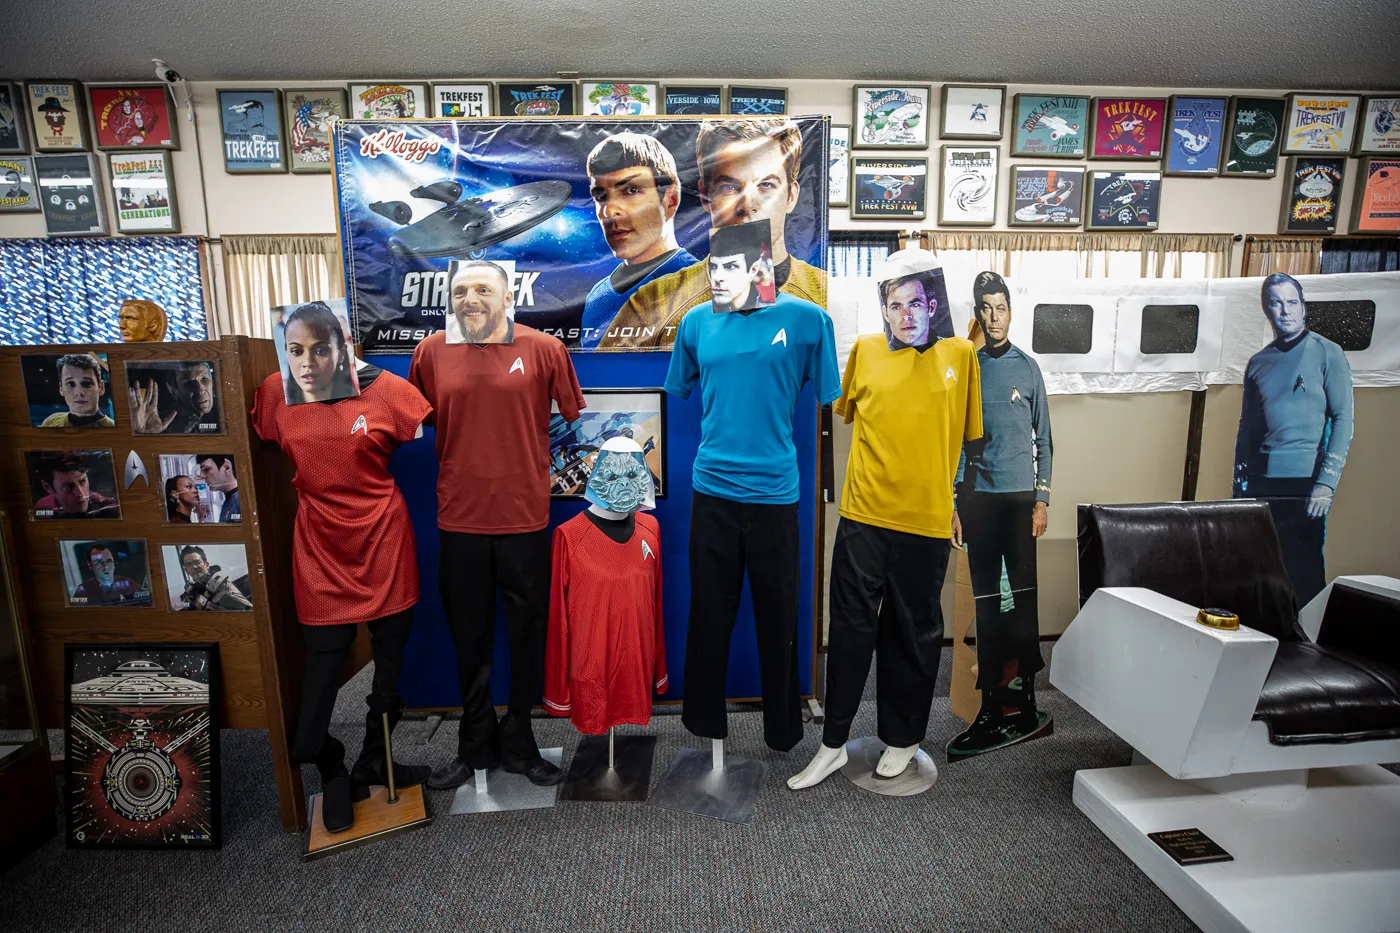 Starfleet uniforms at the Voyage Home History Center in Riverside Iowa. A Star Trek Museum in the future birthplace of Captain James T. Kirk of Star Trek fame.